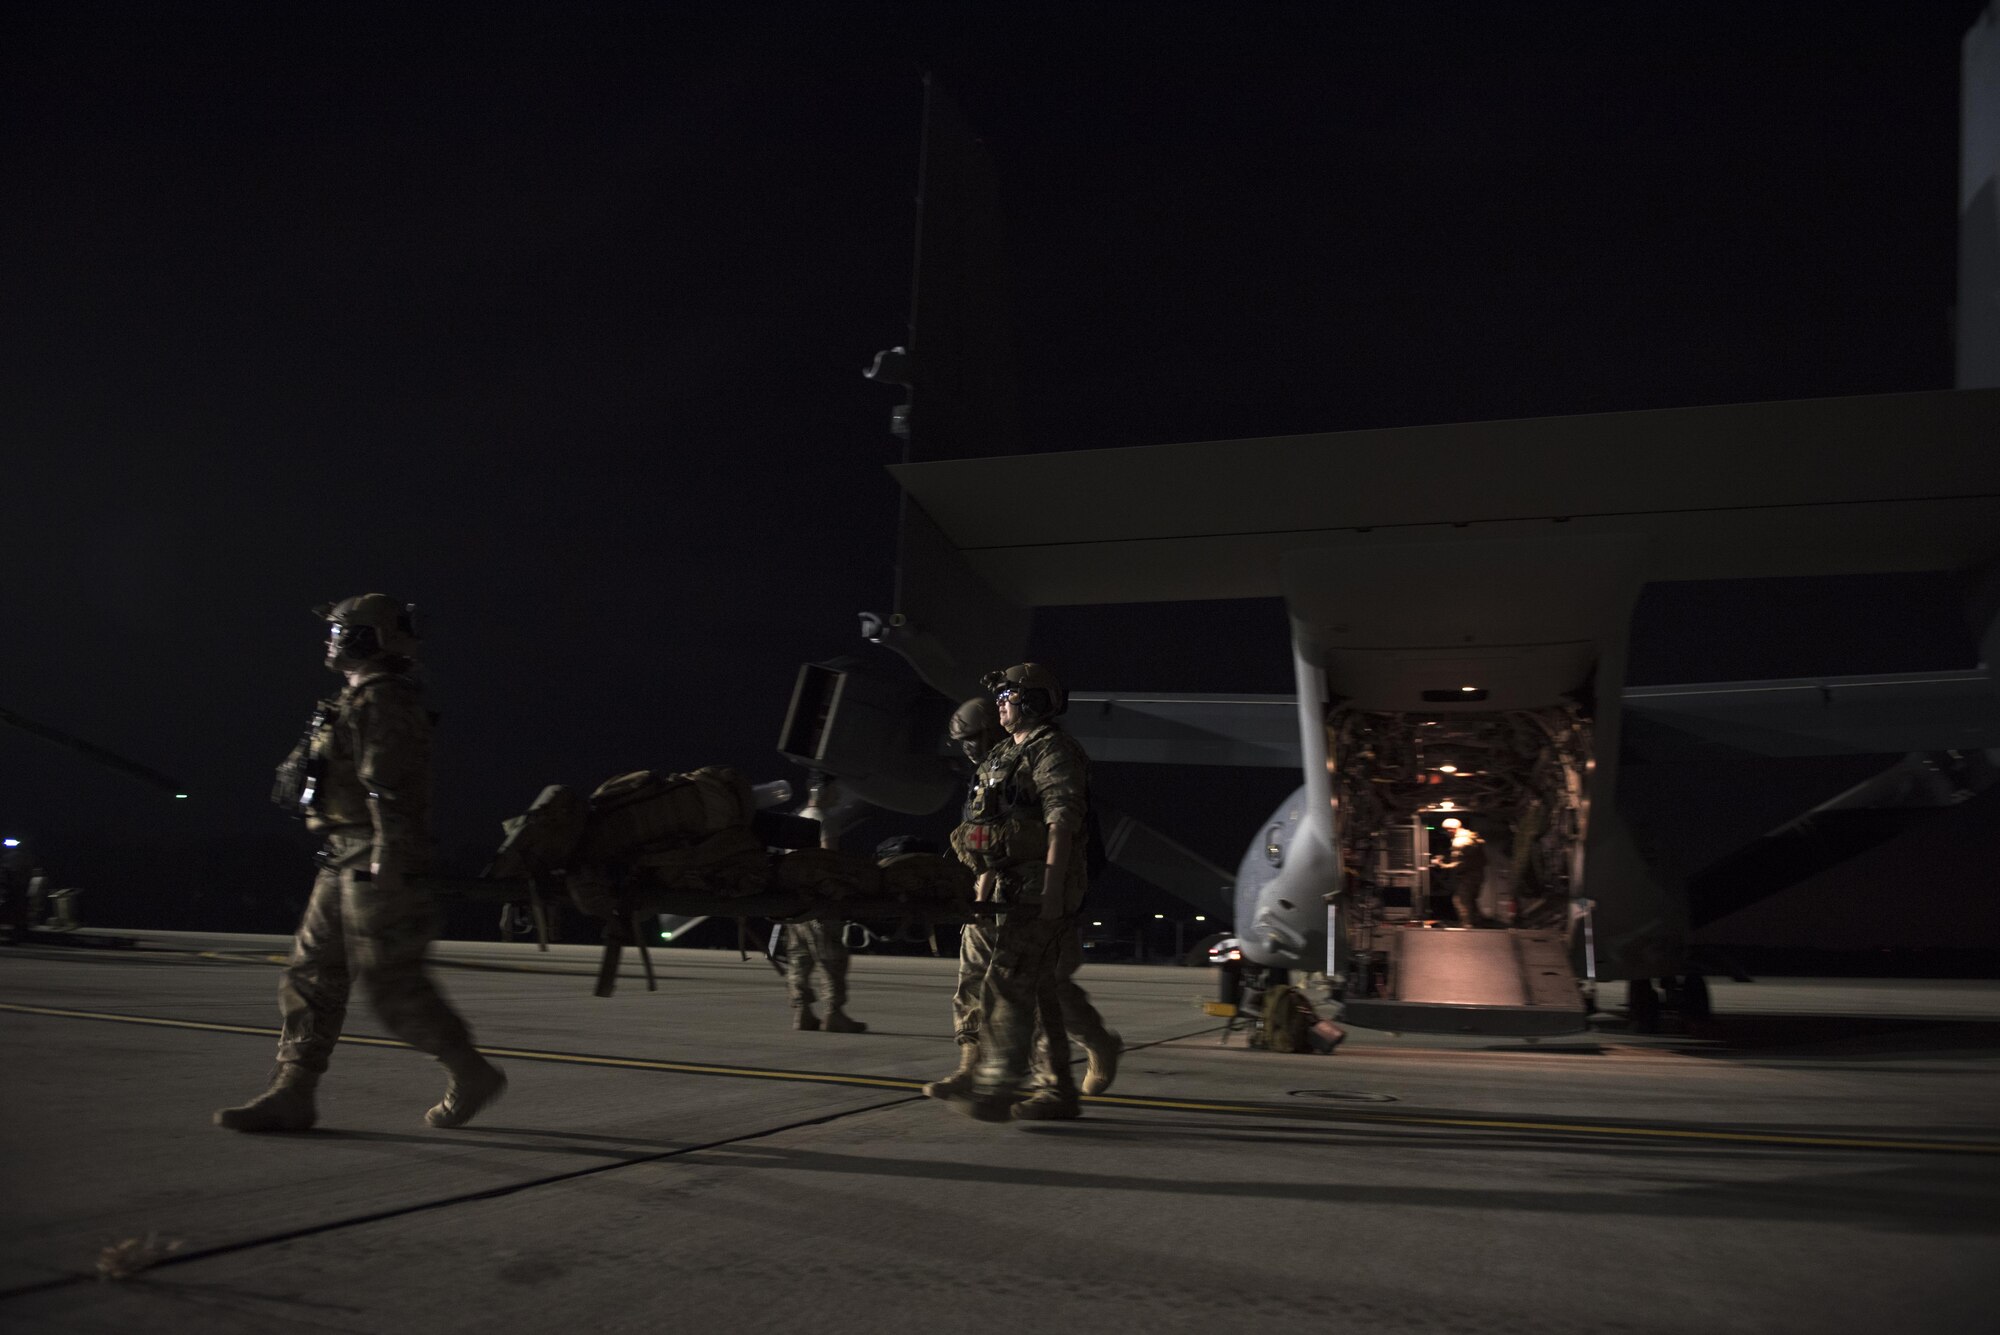 Airmen with the 1st Special Operations Medical Group carry a litter during Task Force Exercise Olympus Archer at Wright Patterson Air Force Base, Ohio, Aug. 17, 2016. Olympus Archer provides training opportunities for more than 230 Air Commandos, with an emphasis on medical and flying operations. (U.S. Air Force photo by Staff Sgt. Christopher Callaway)